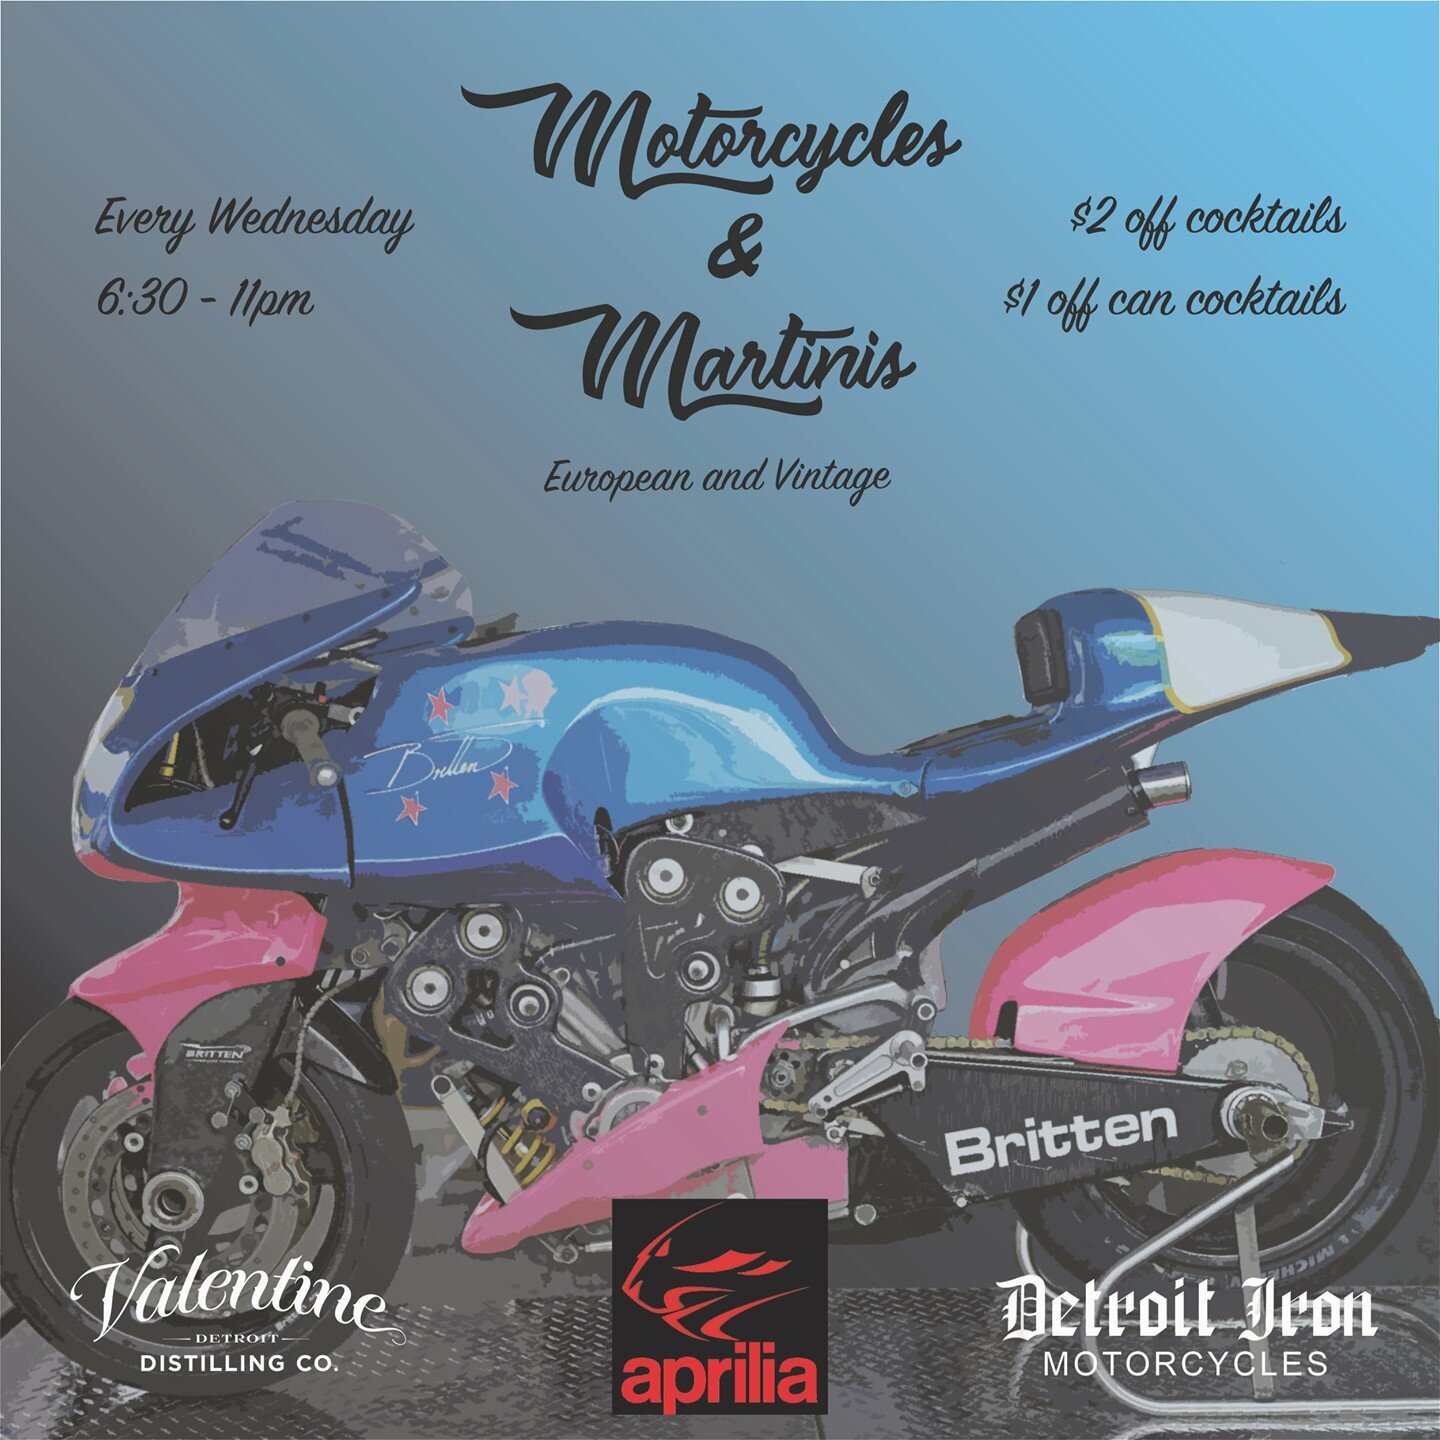 Join us every Wednesday from 6:30 - 11pm for Motorcycles and Martinis! Check out a variety of European and vintage bikes and then grab a cocktail on our patio. Guests enjoy happy hour all night and $1.00 off canned cocktails.